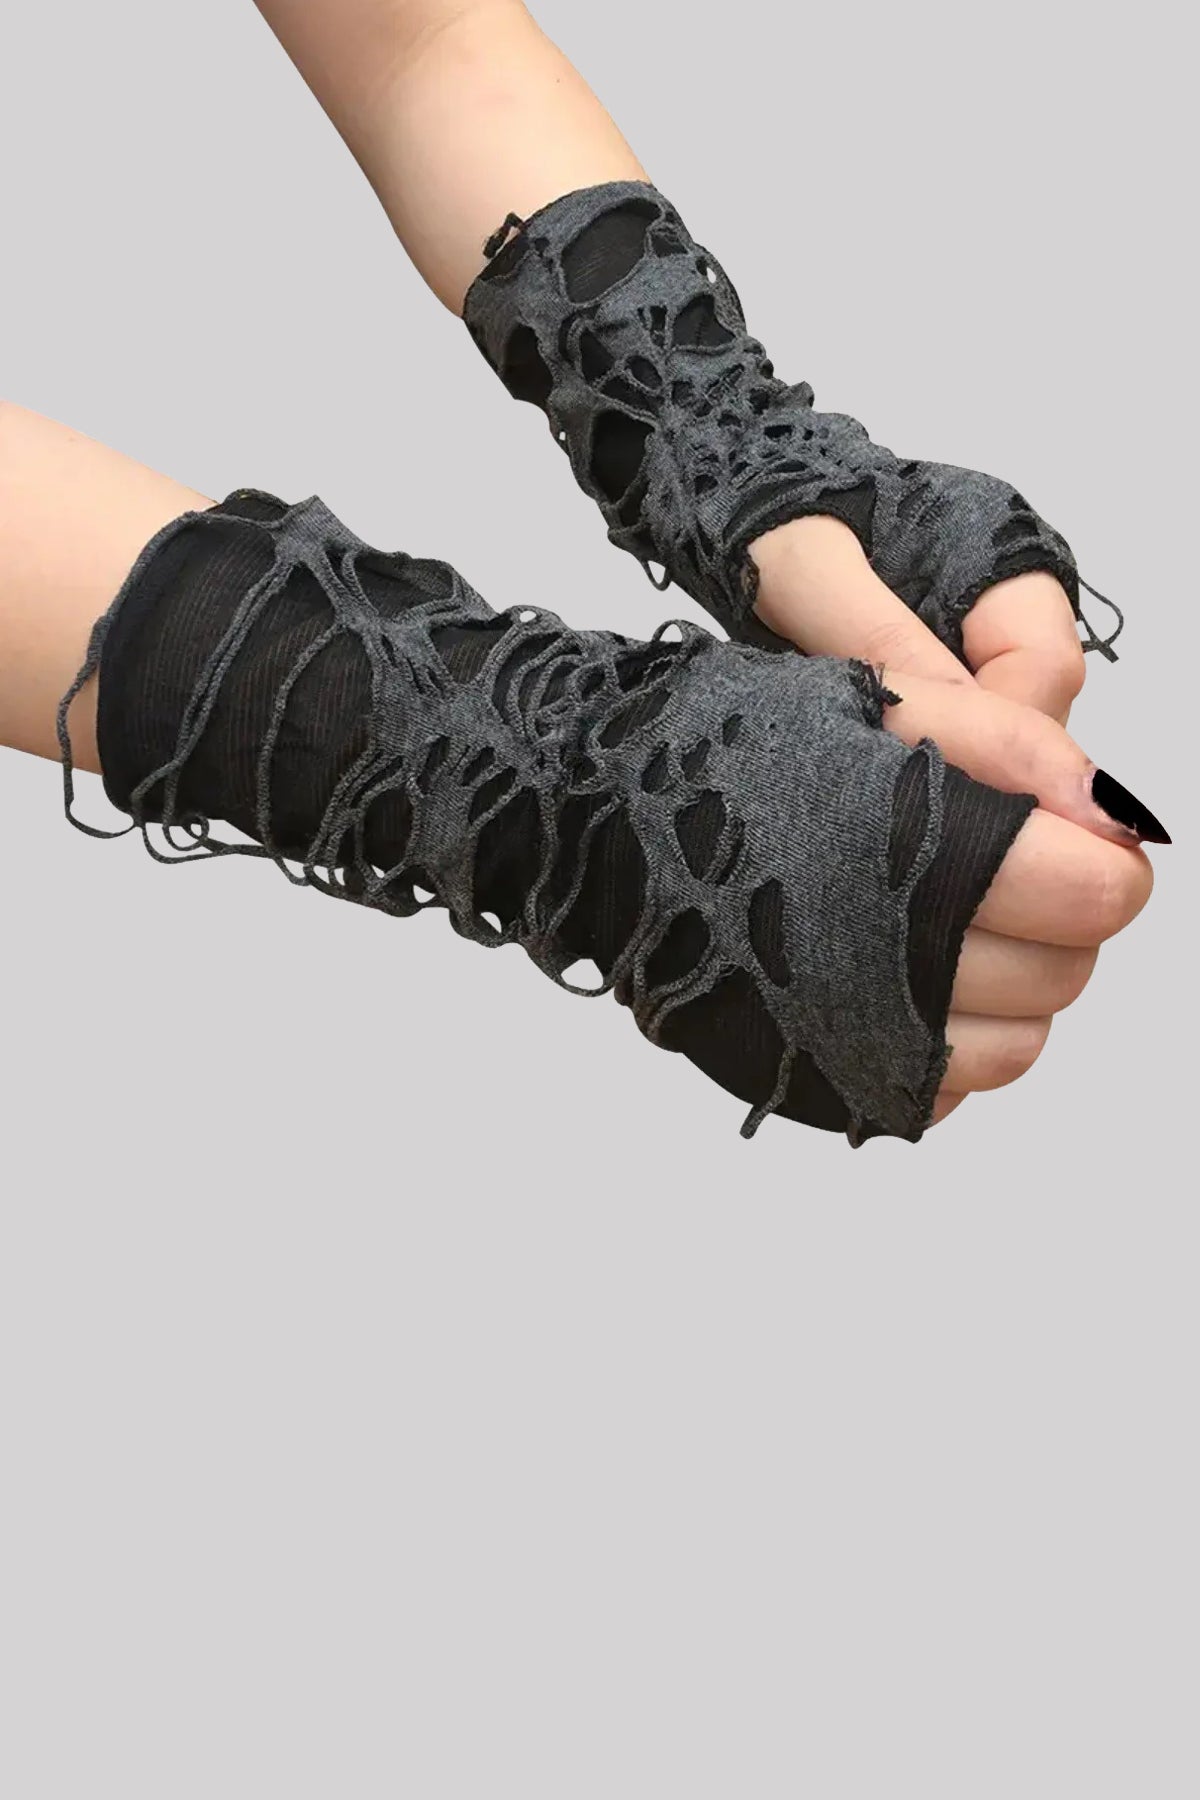 Ro Rox Distressed Fingerless Armwarmers Gothic Gloves